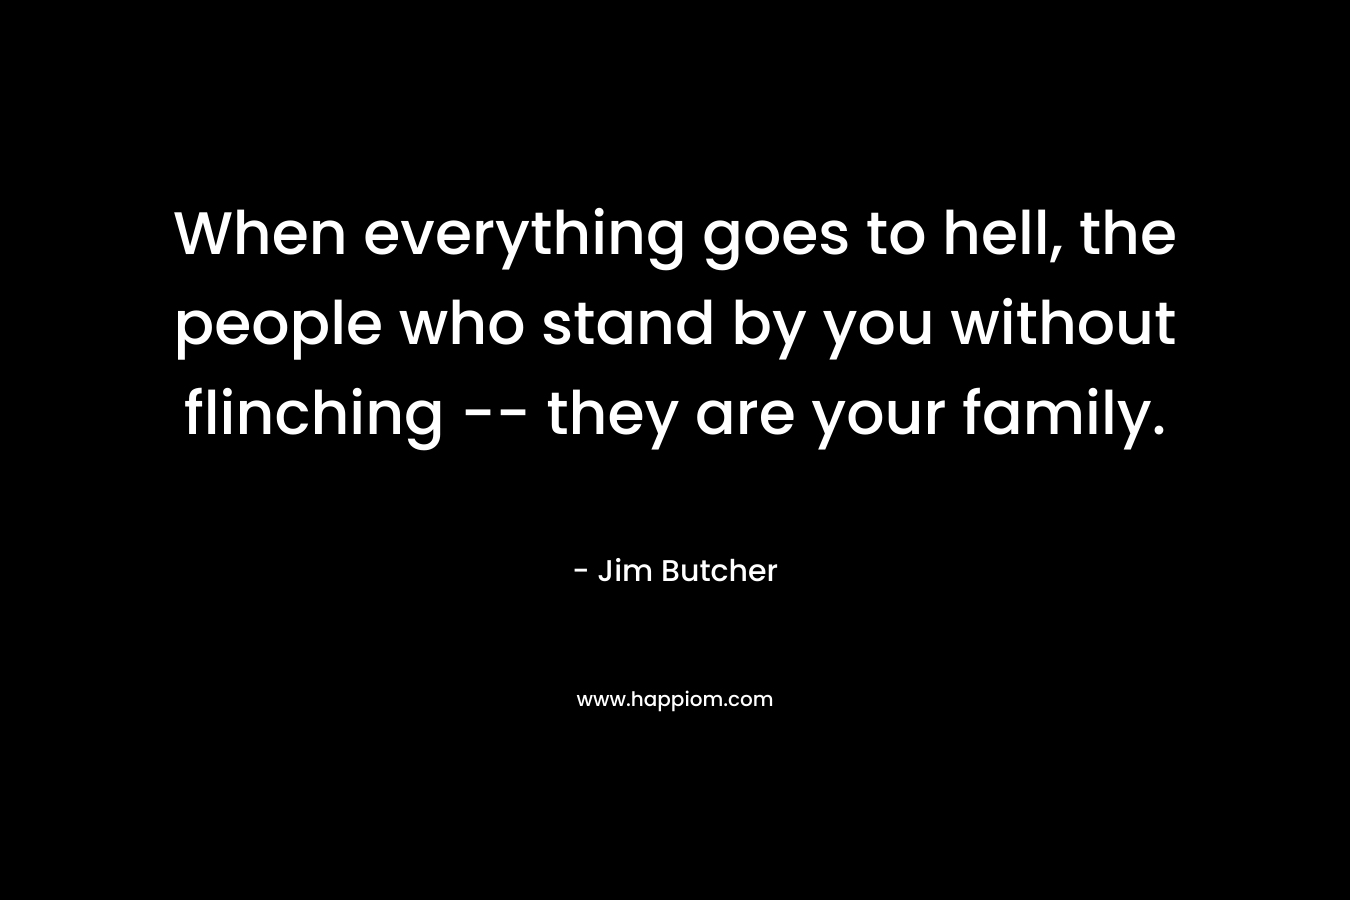 When everything goes to hell, the people who stand by you without flinching -- they are your family. 